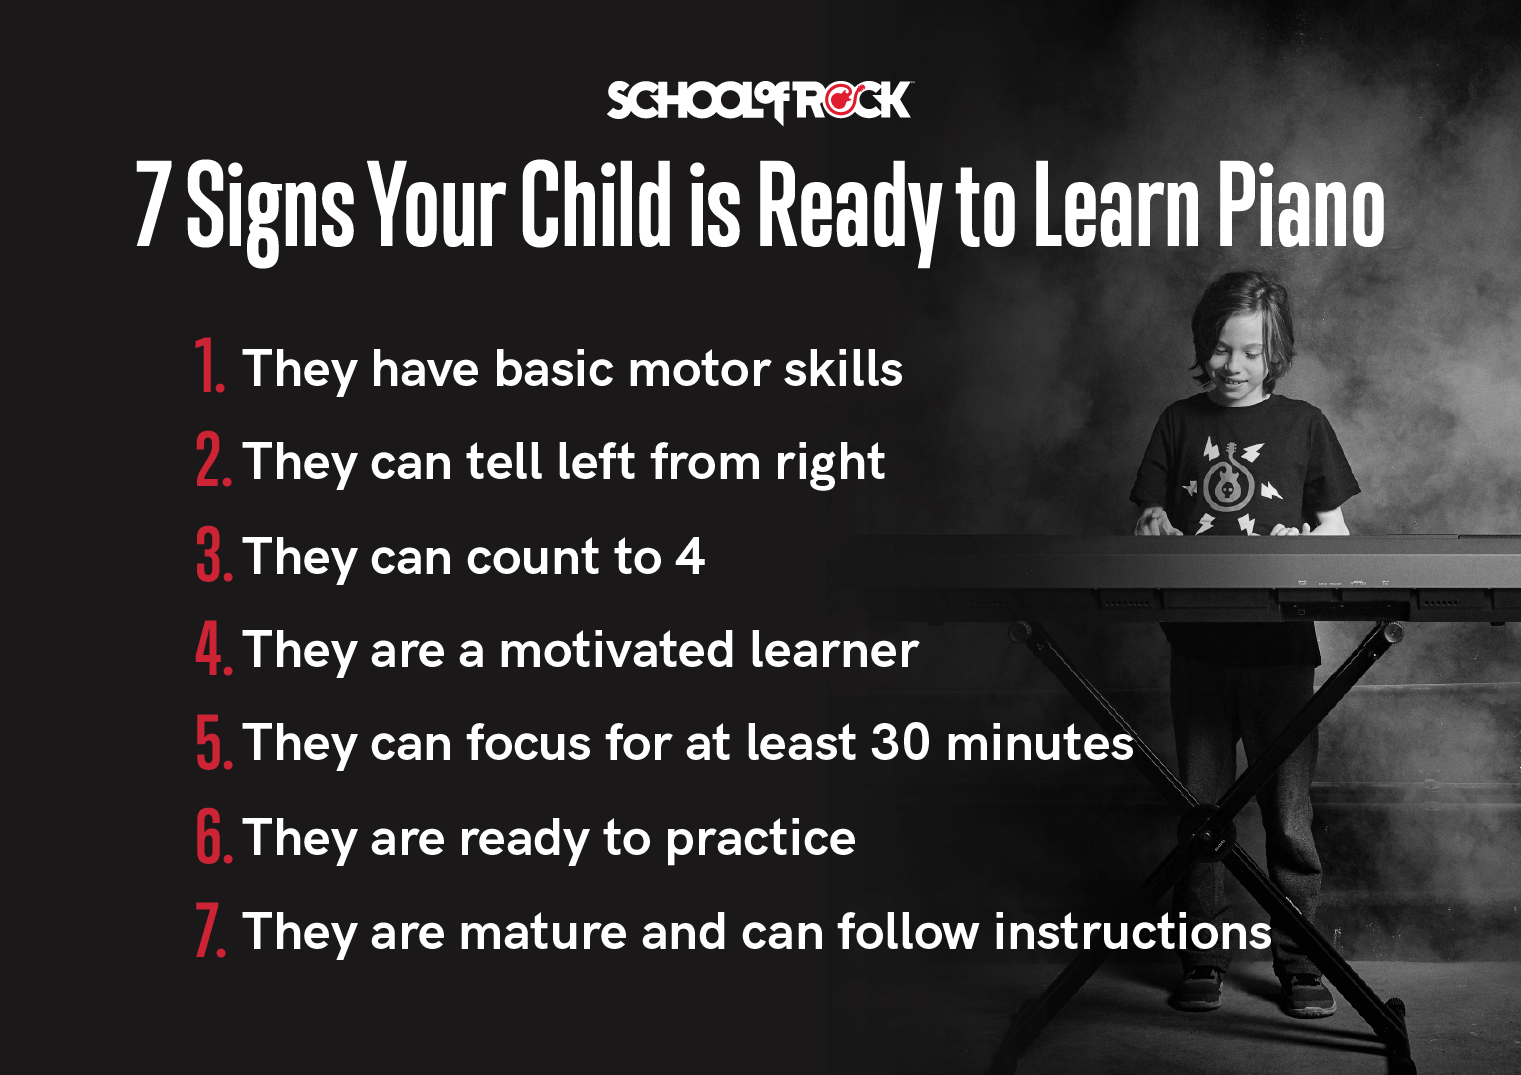 7 signs your child is ready to learn piano